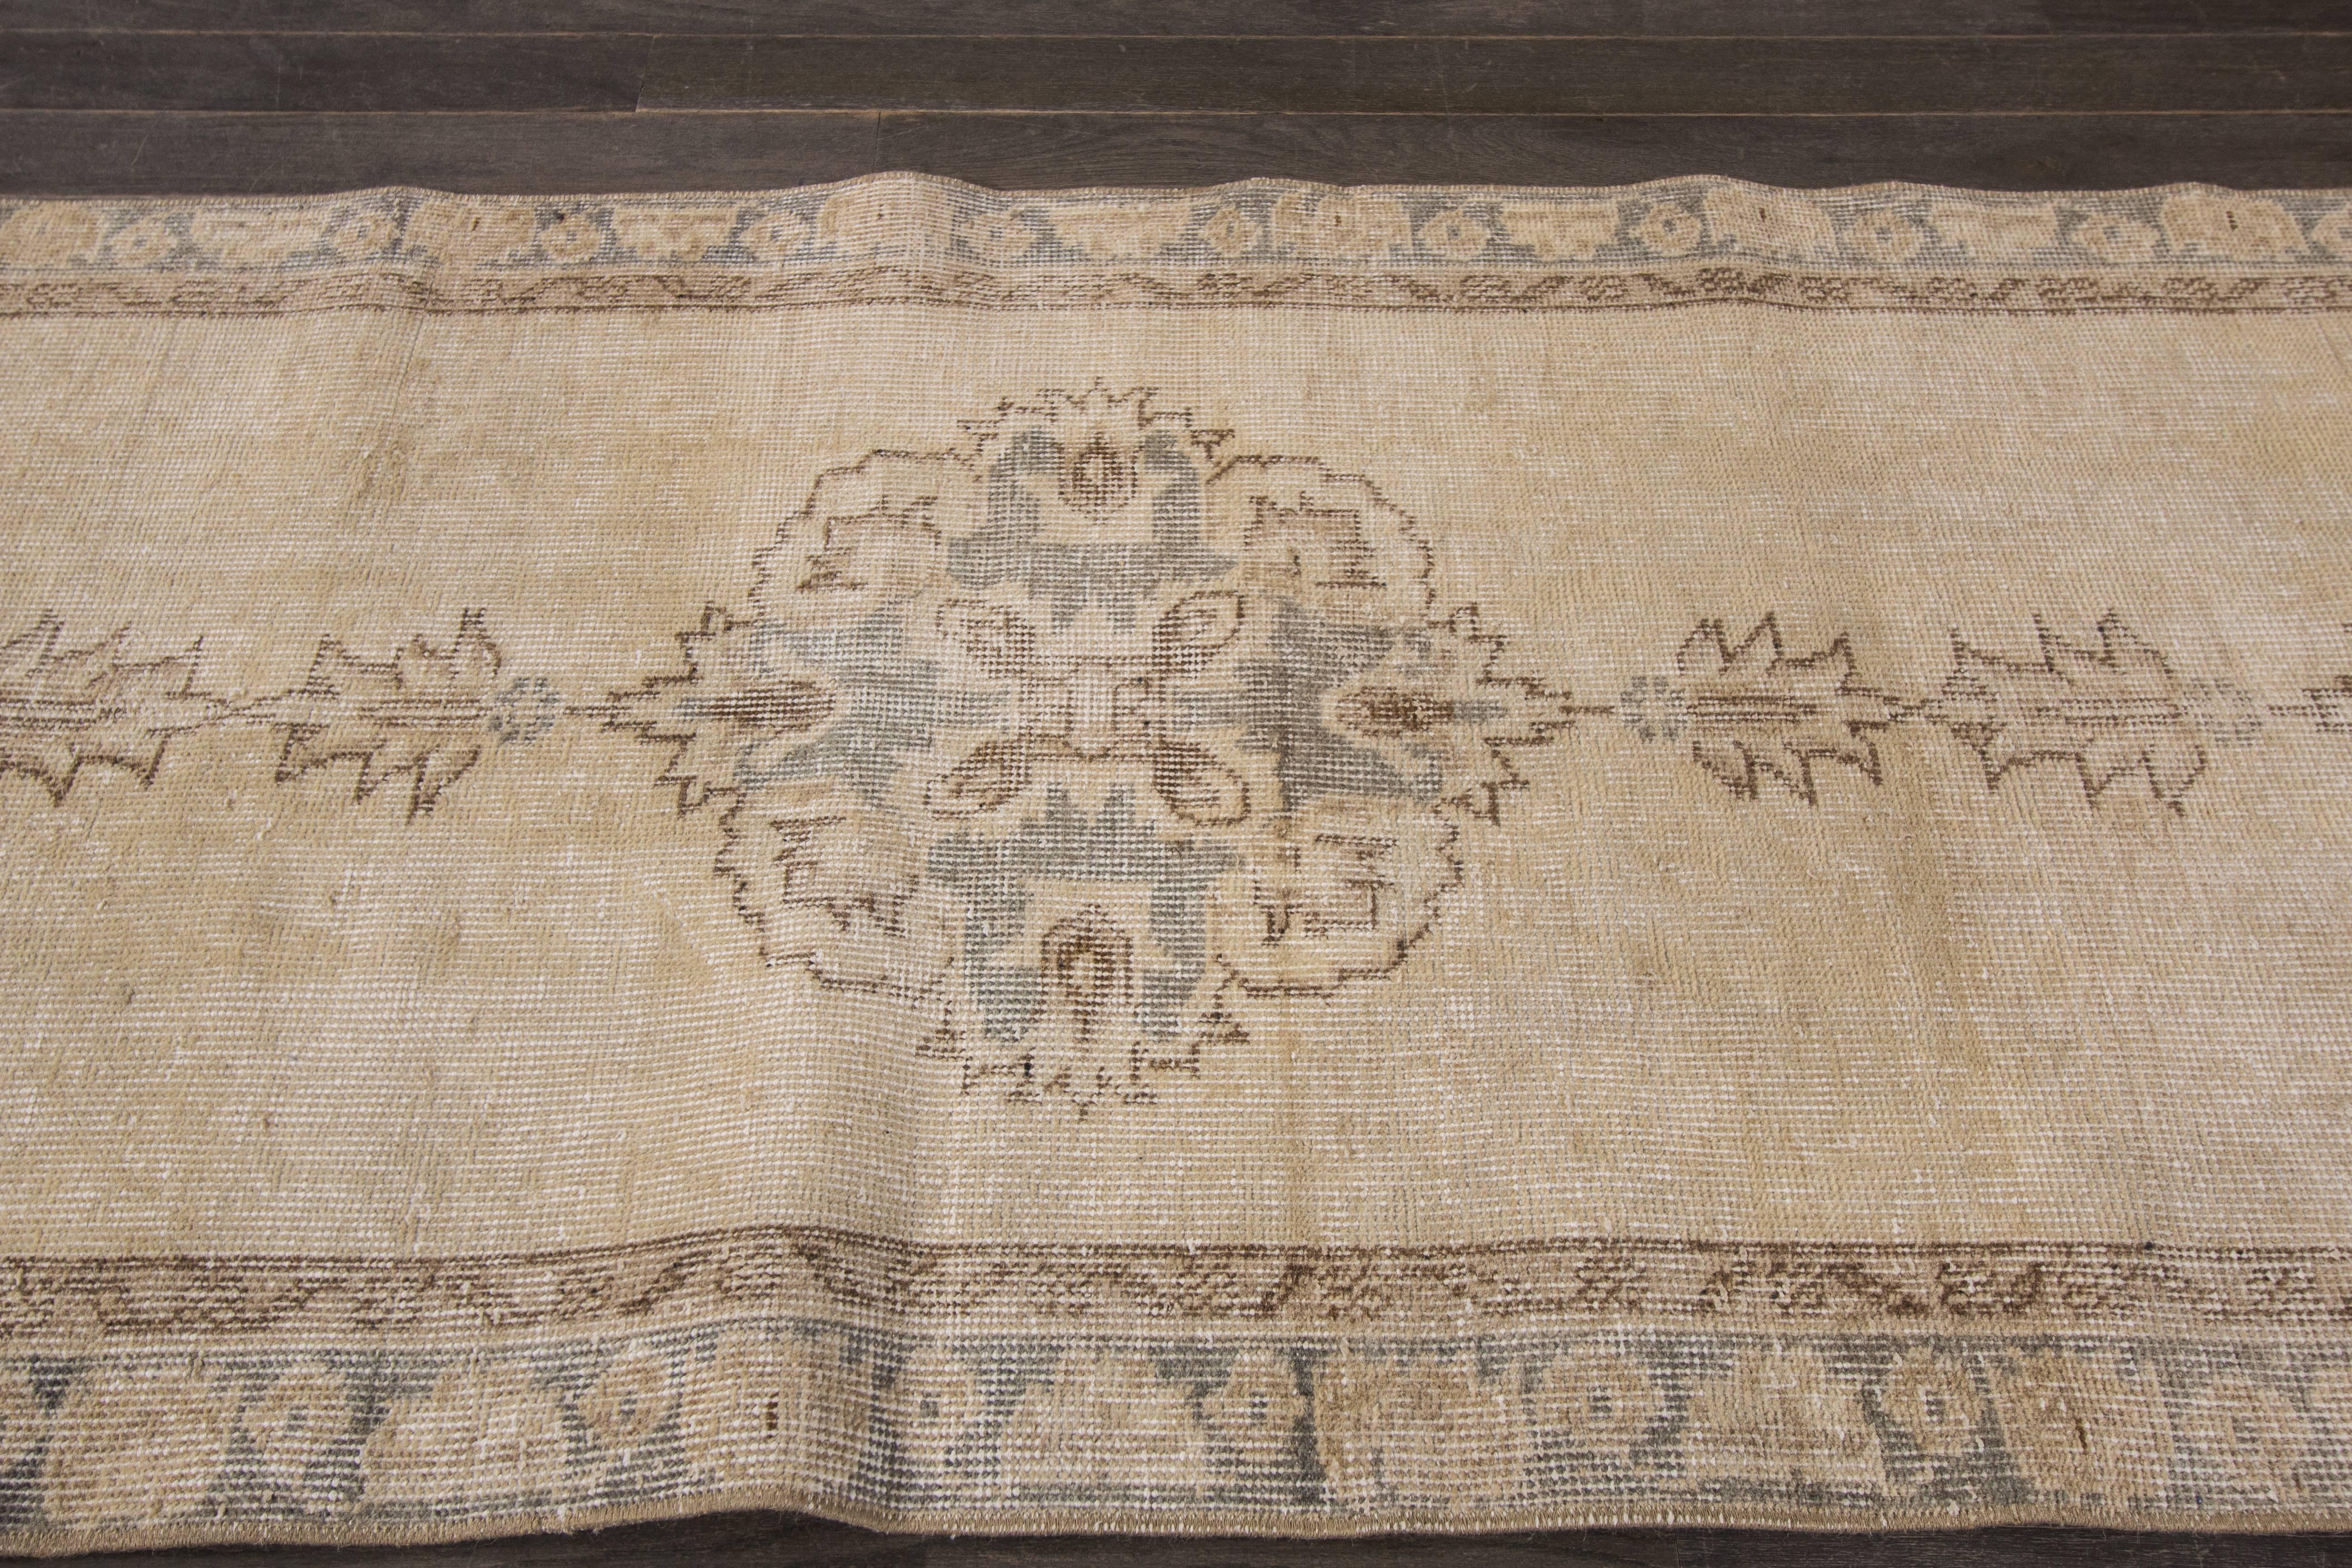 This gorgeous vintage Sparta was made in Isparta in the early 21st century. Sparta rugs were made to look like Sarouk rugs with an all-over floral design on a vibrant colored field; however, this Sparta went through an antique wash and the colors